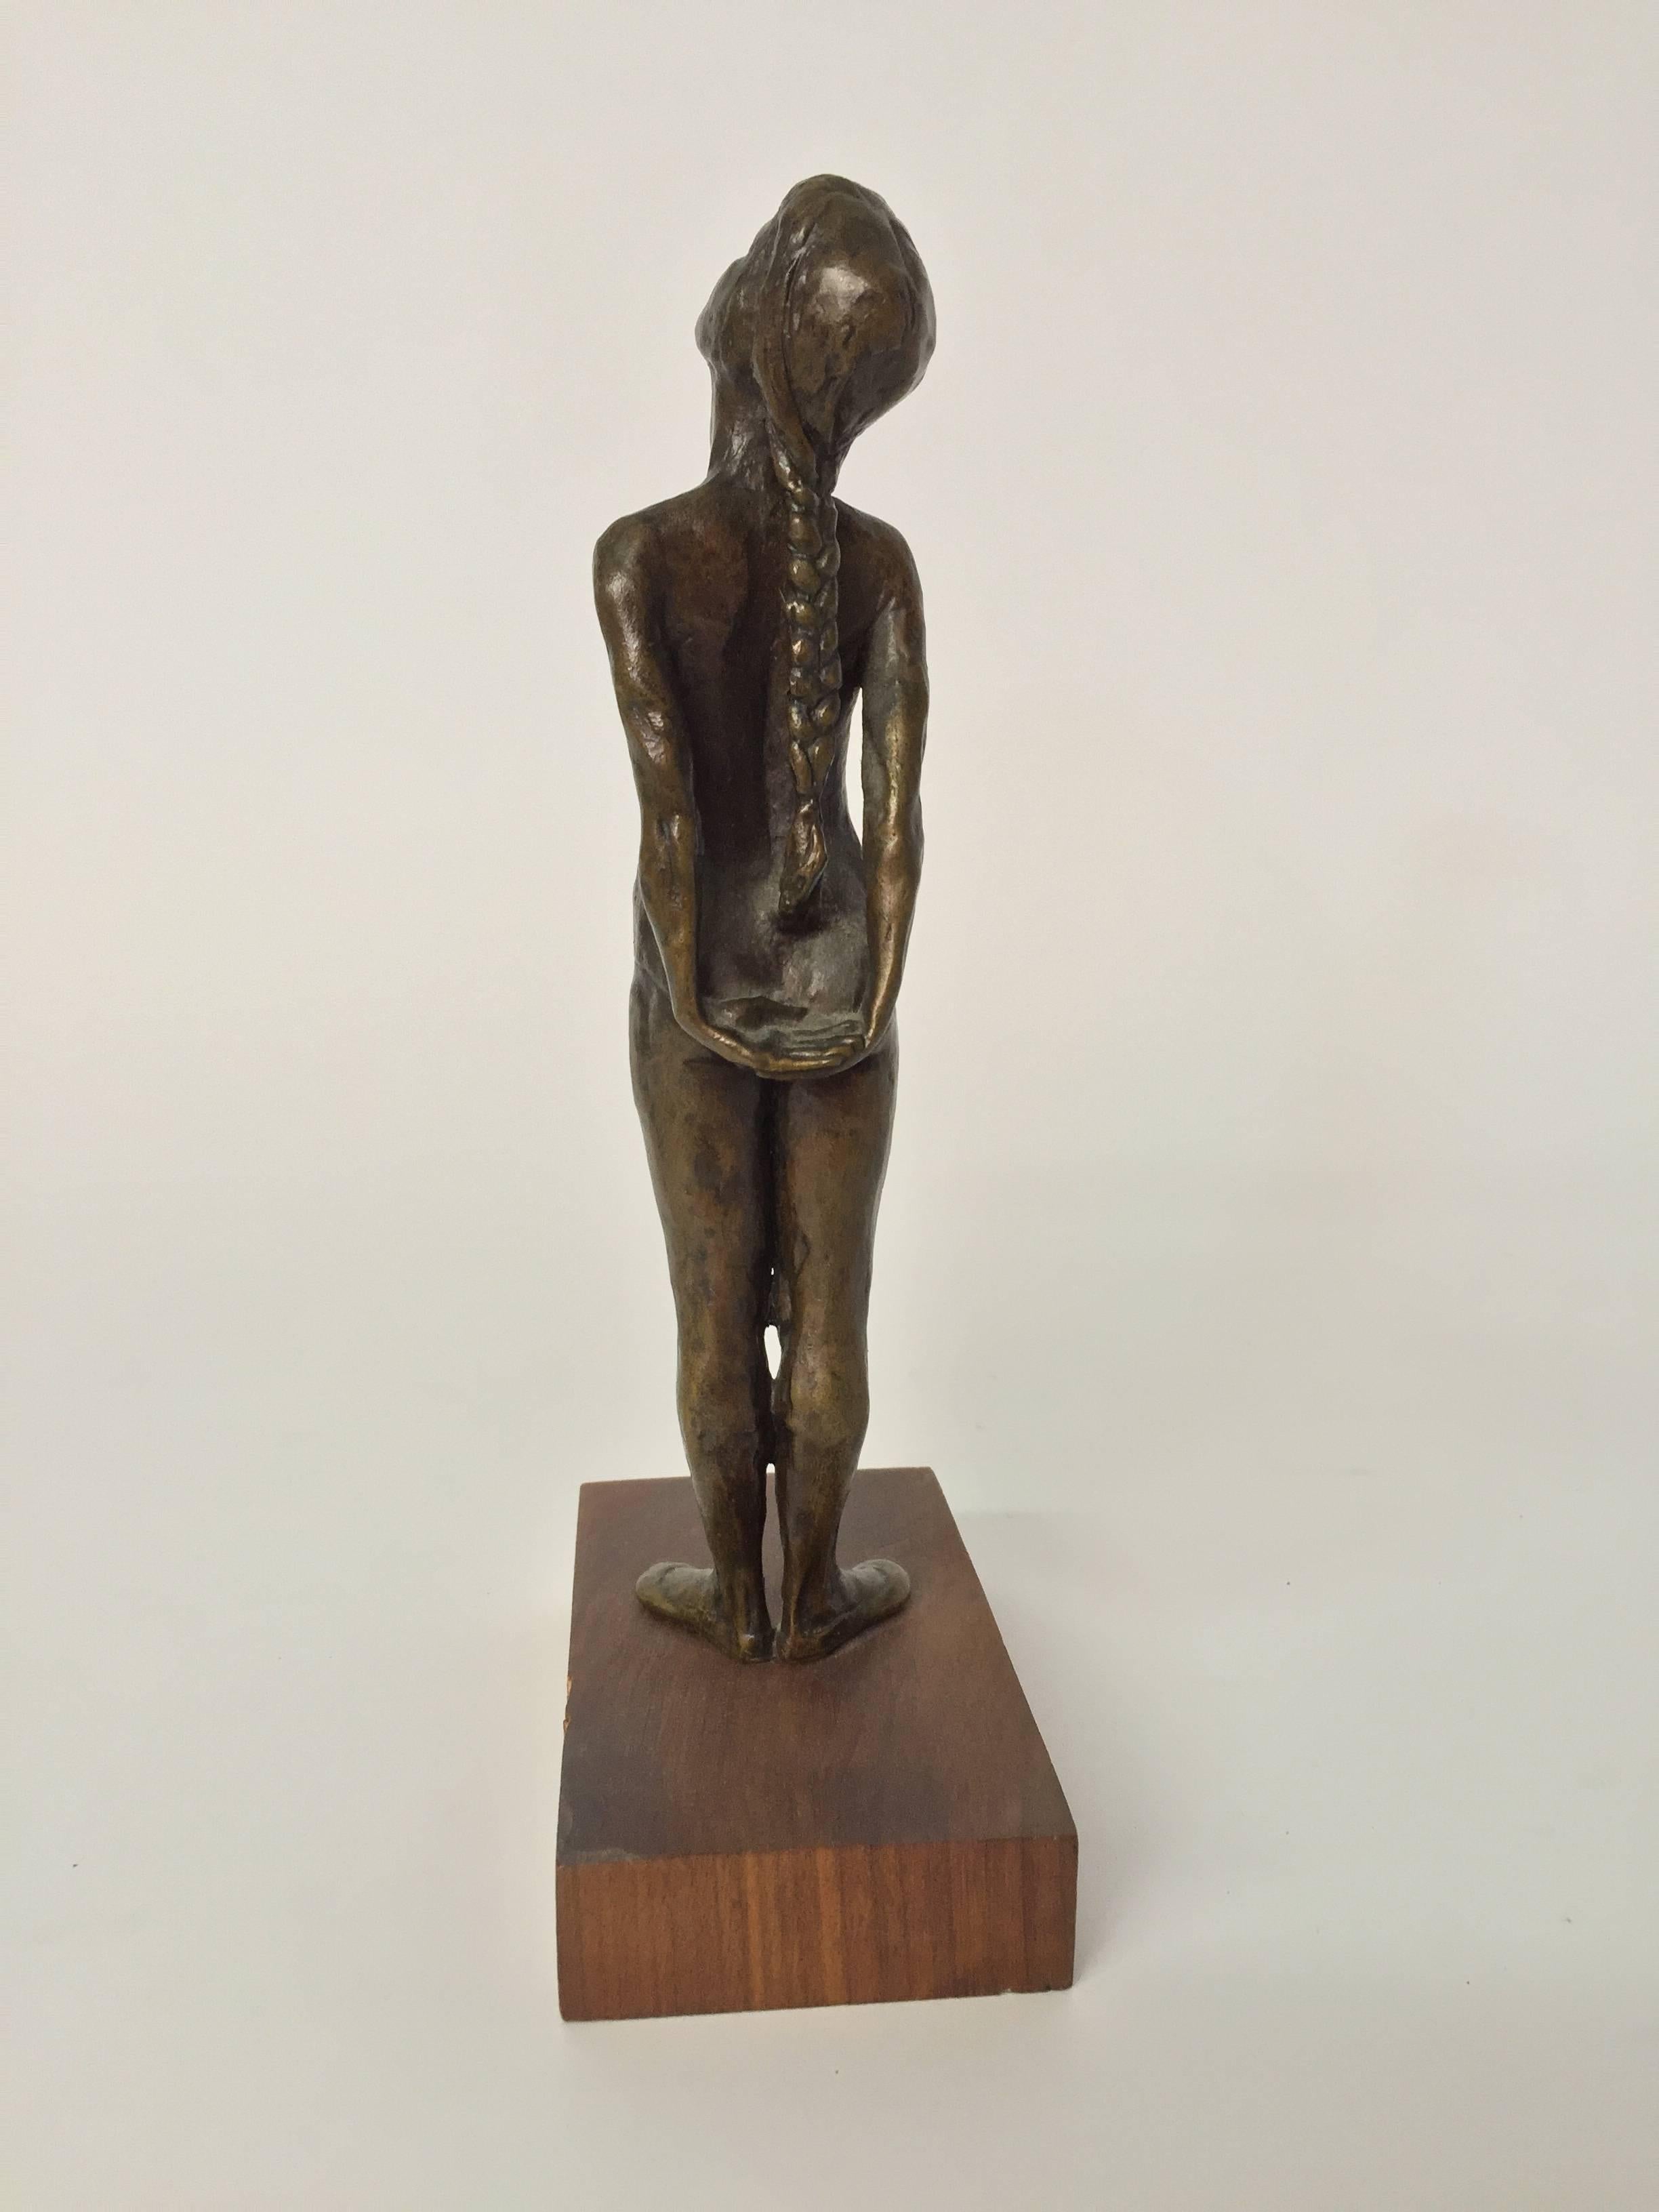 Finely casted ballerina bronze. Initialed in the casting, SGK. The artist has rendered her in a resting stretch position. The bronze is mounted to a solid walnut block base, circa 1960.